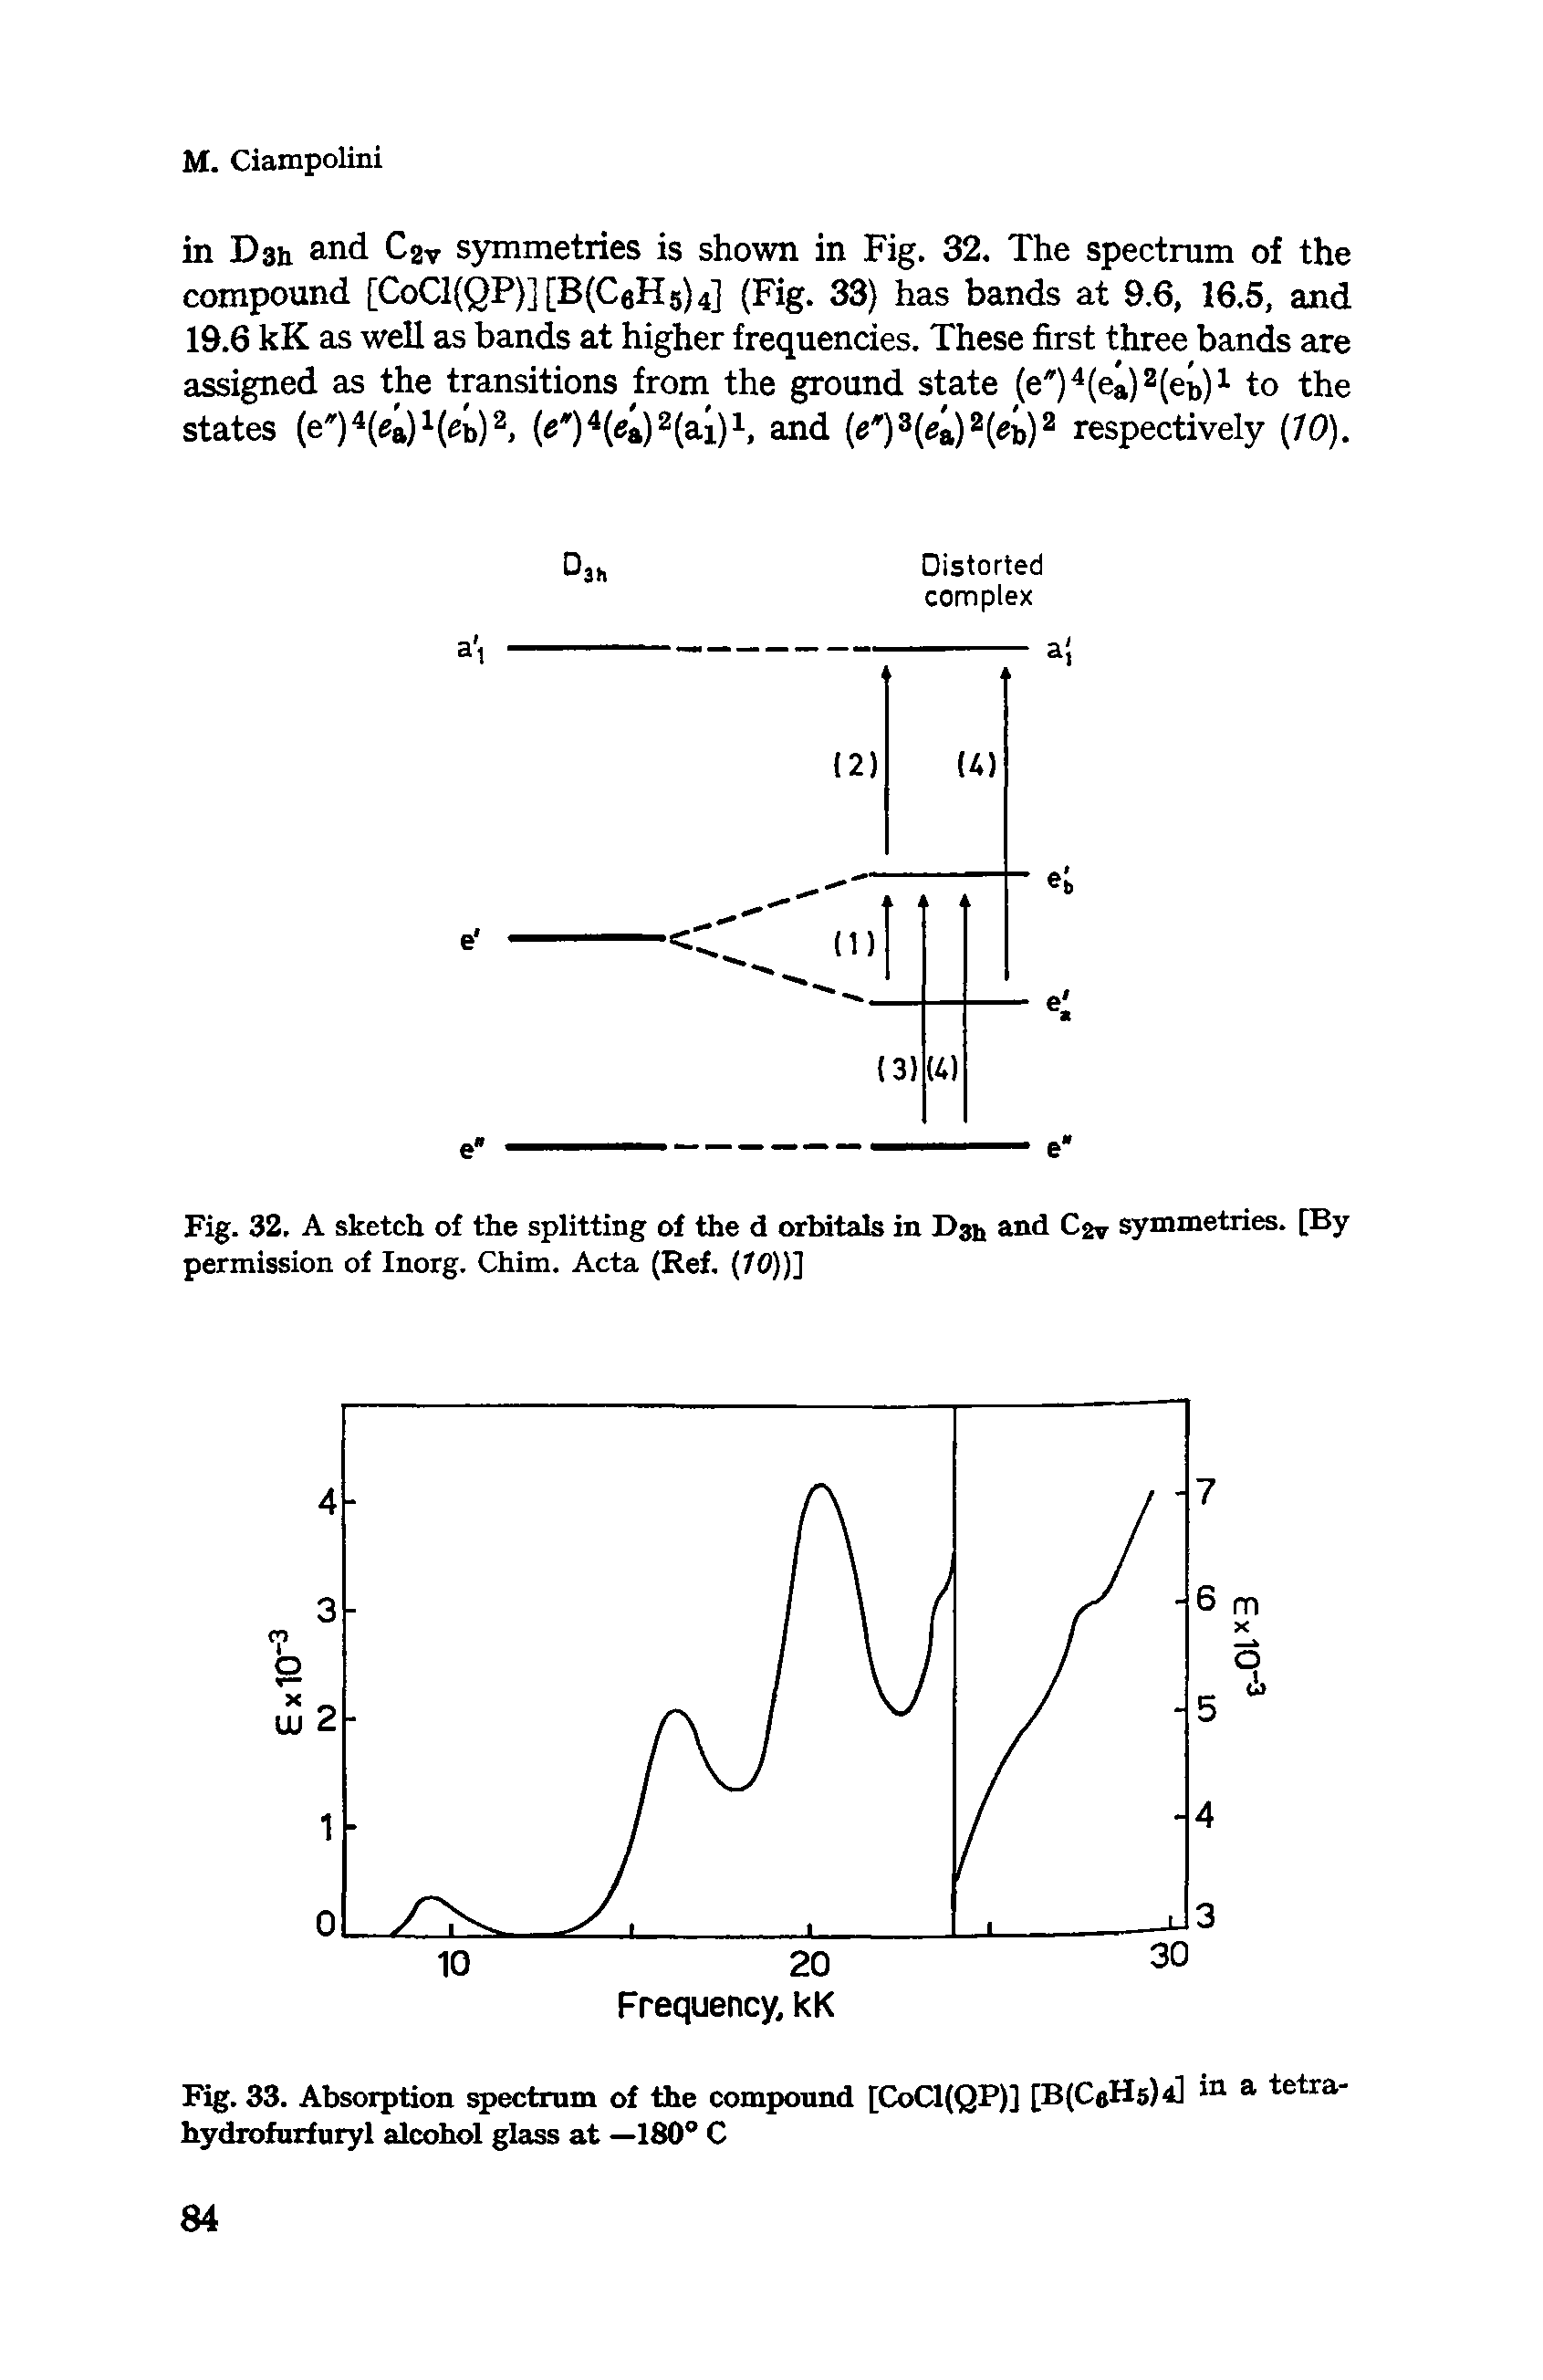 Fig. 33. Absorption spectrum of the compound [CoCl(QP)] [B(CeH5)4] ia a tetra-hydrofurfuryl alcohol glass at —180 C...